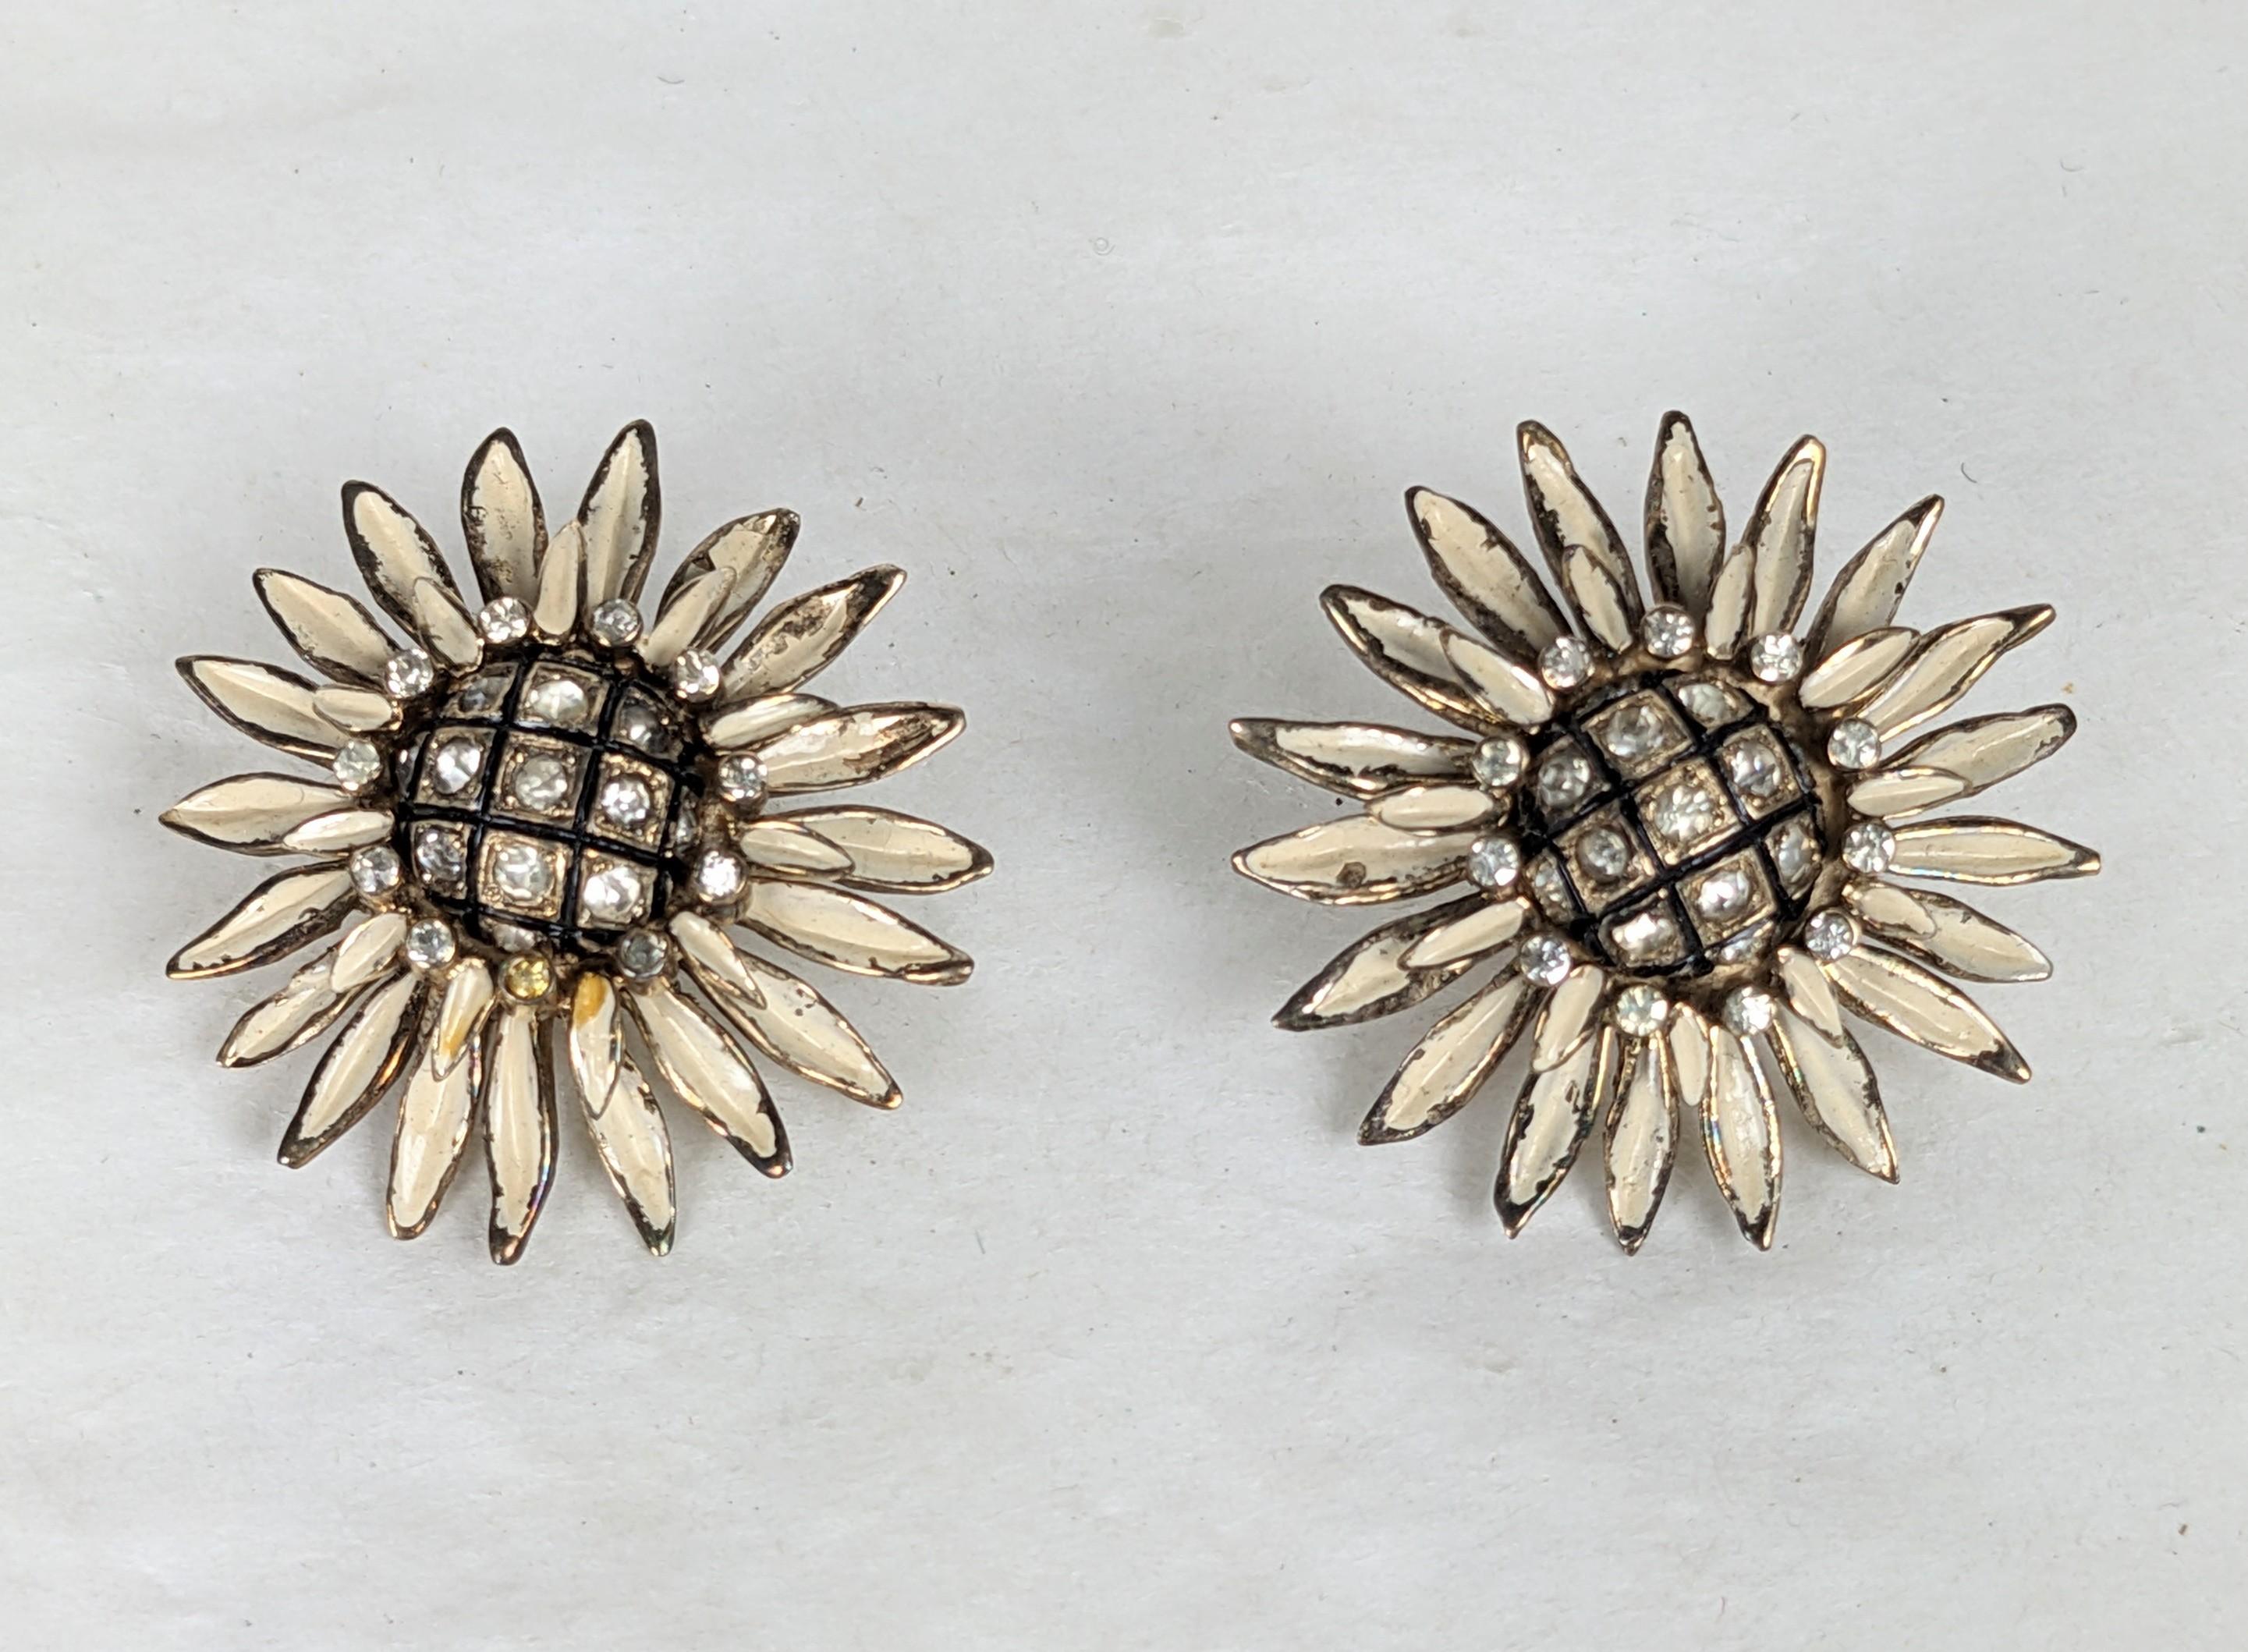 Nettie Rosenstein Retro Sunflower ear clips. Of rose gold plated sterling silver, white and black cold enamel and crystal rhinestone pave. Clip back fittings. Minor wear to enamel. 1940's USA. 
L 1 1/8